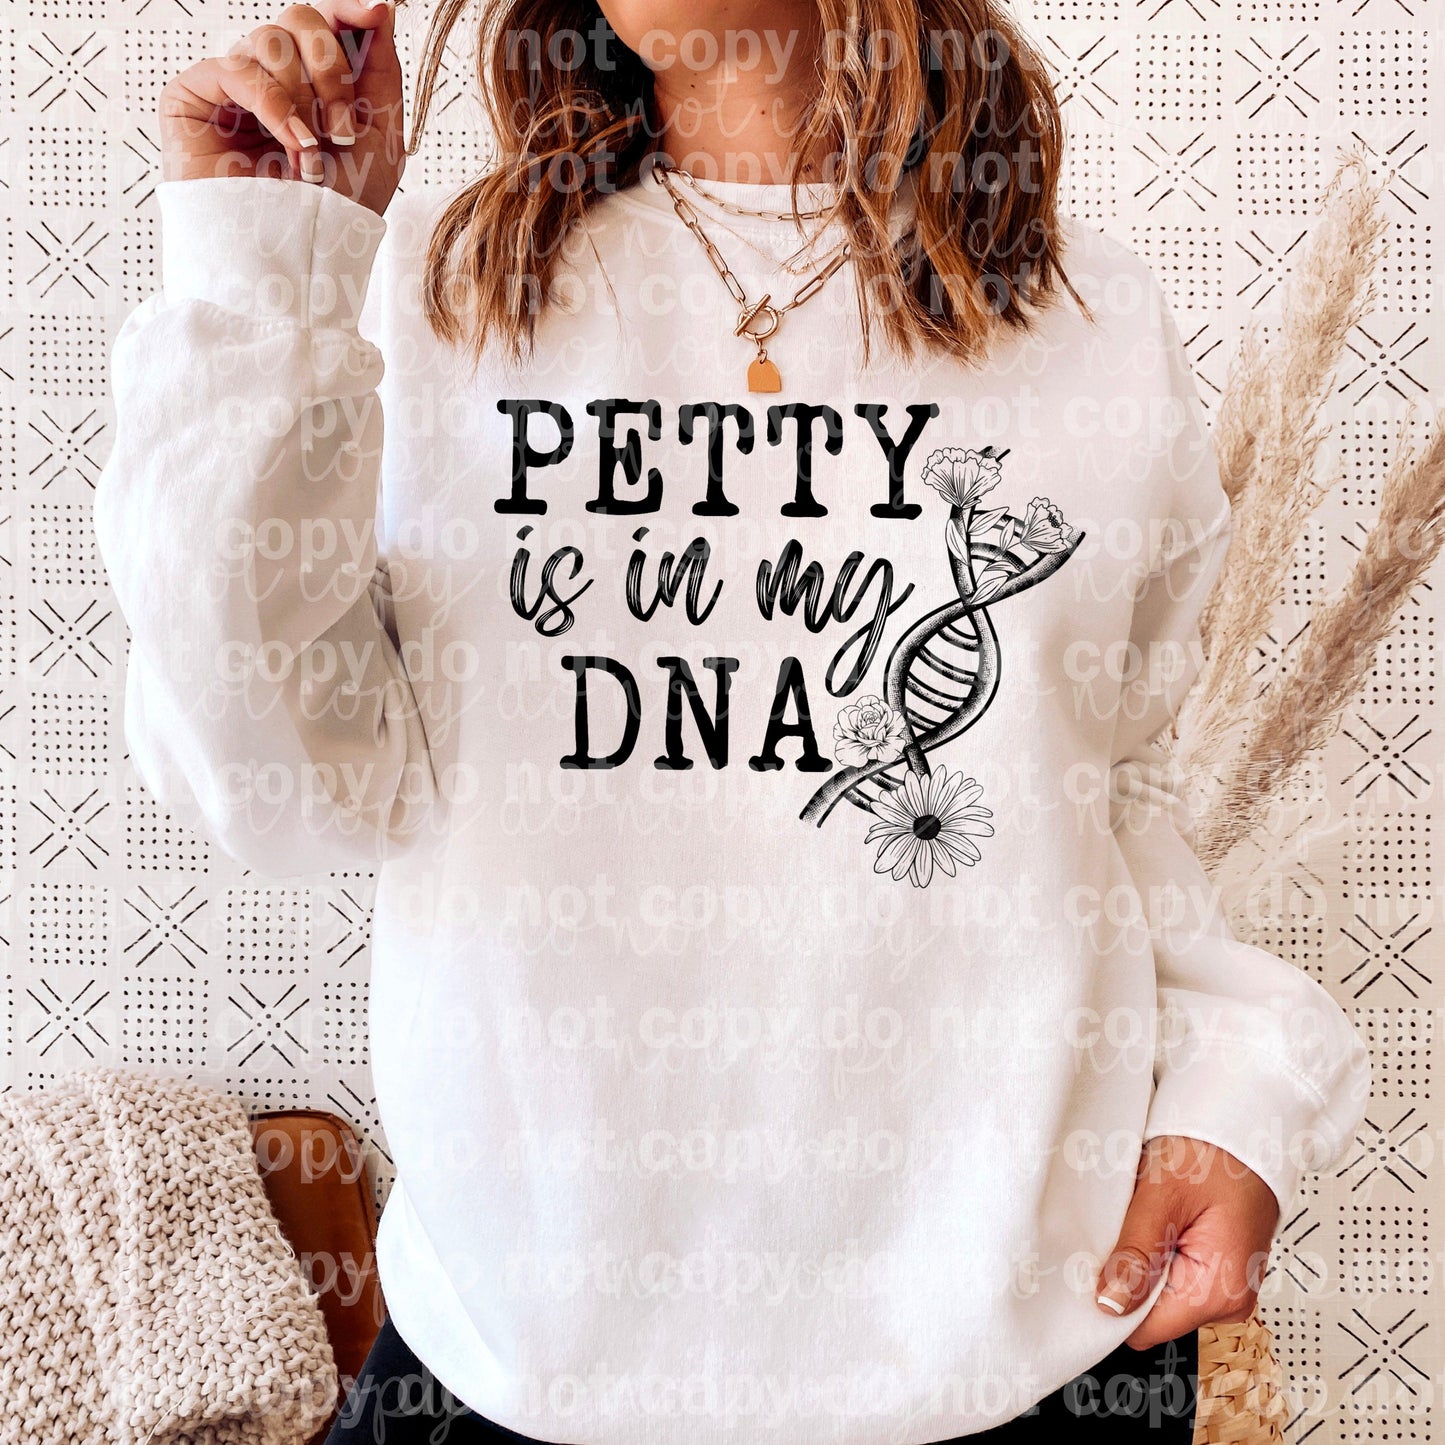 Petty is in my DNA BLACK INK one color Screen print transfer